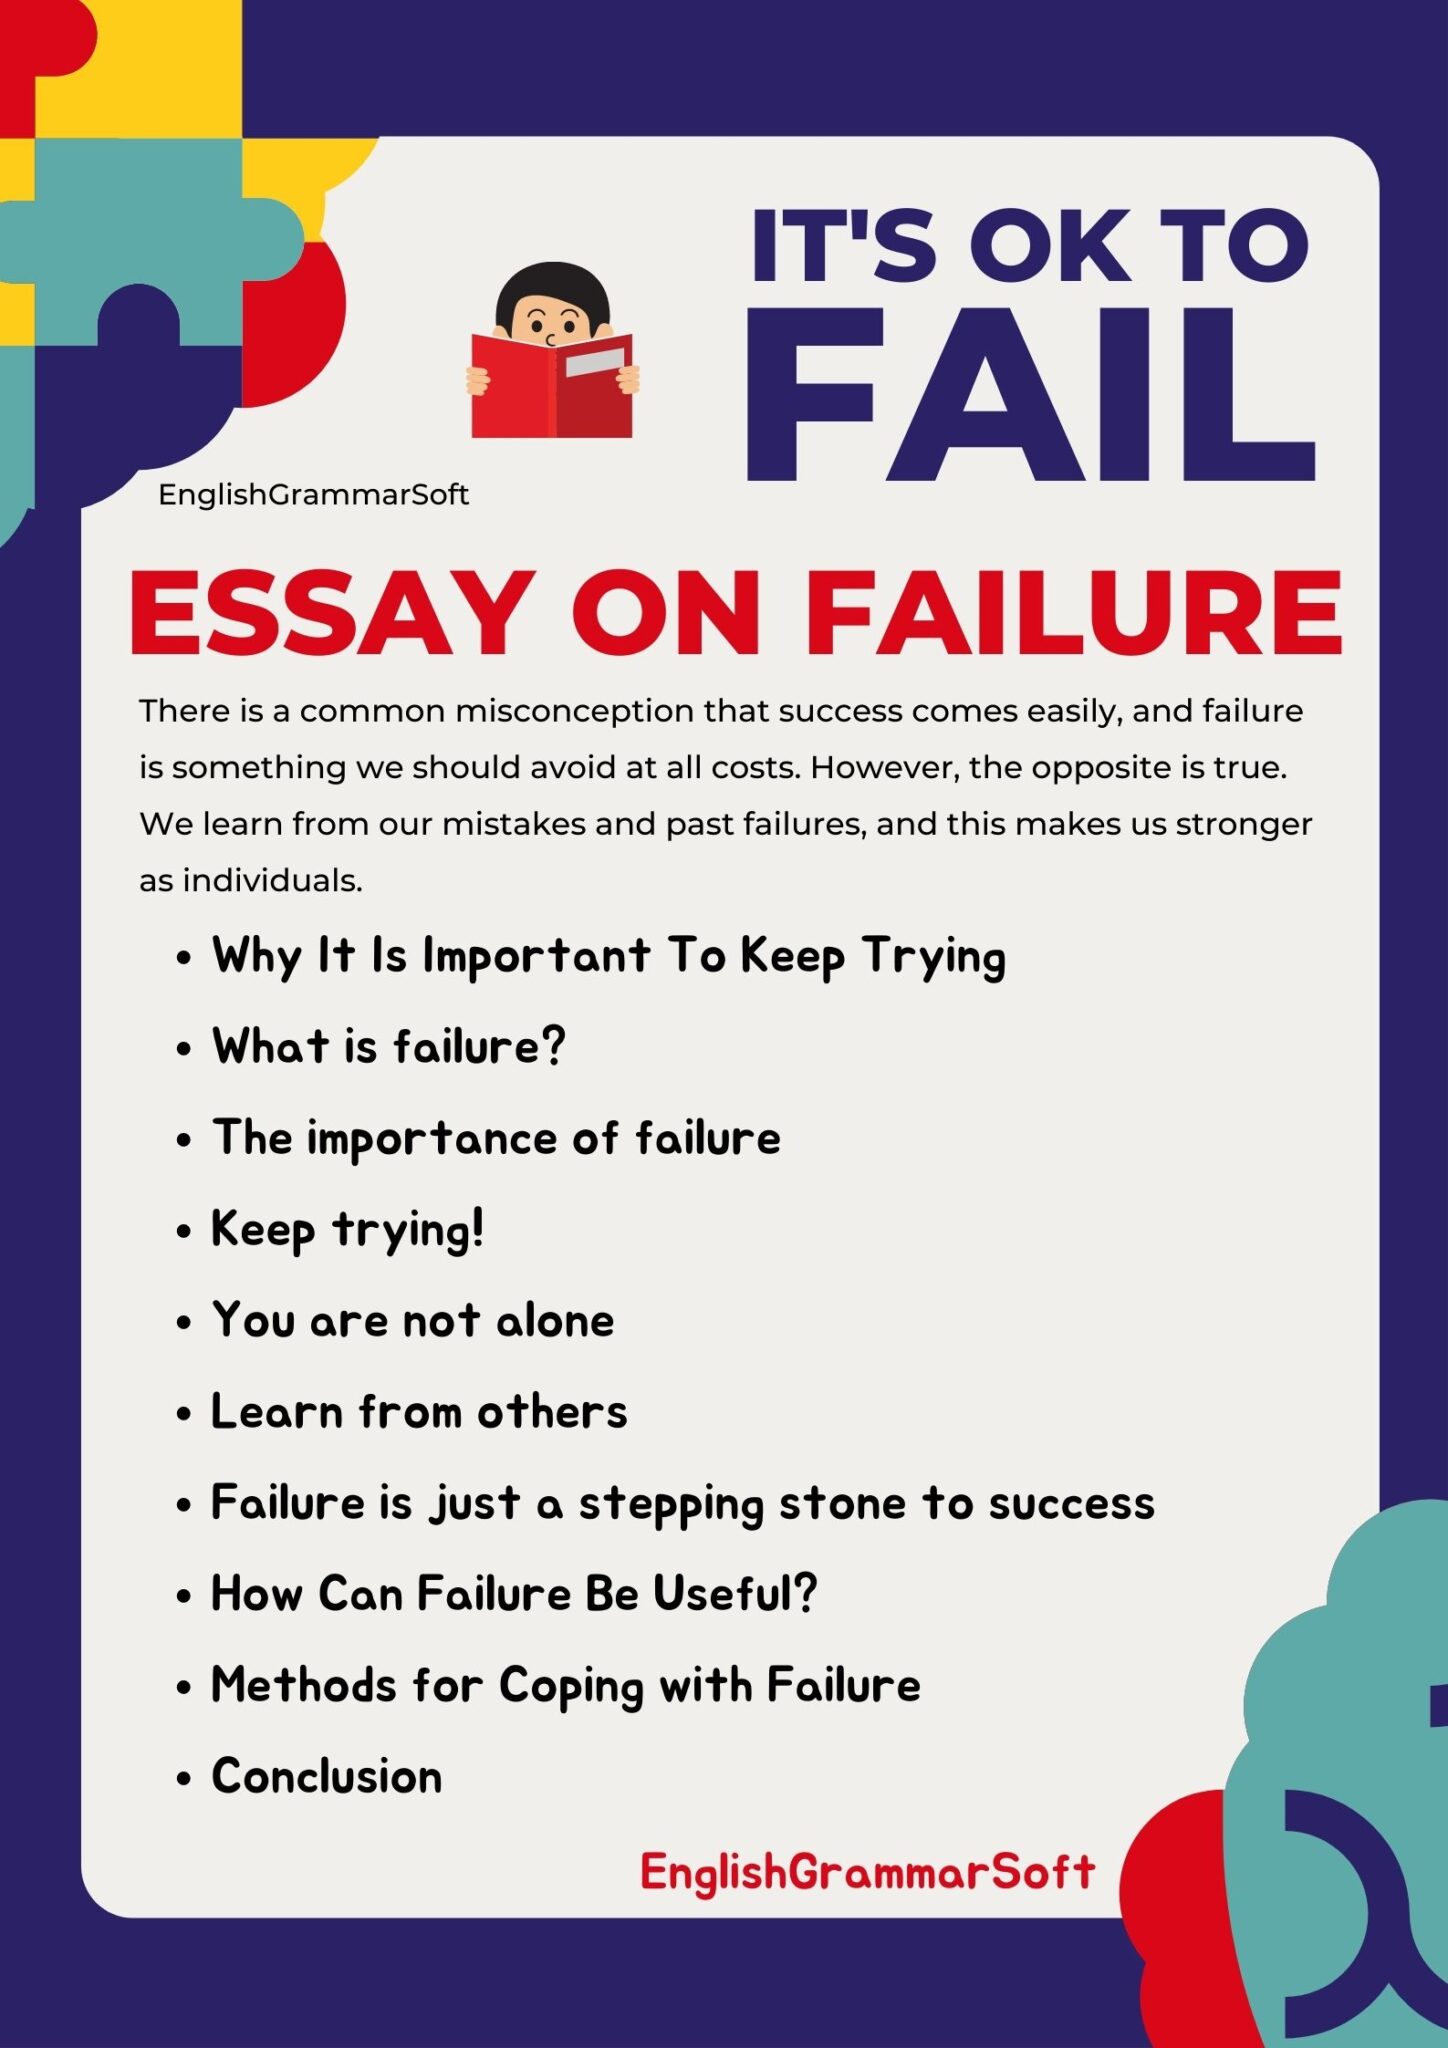 essay about failure to success